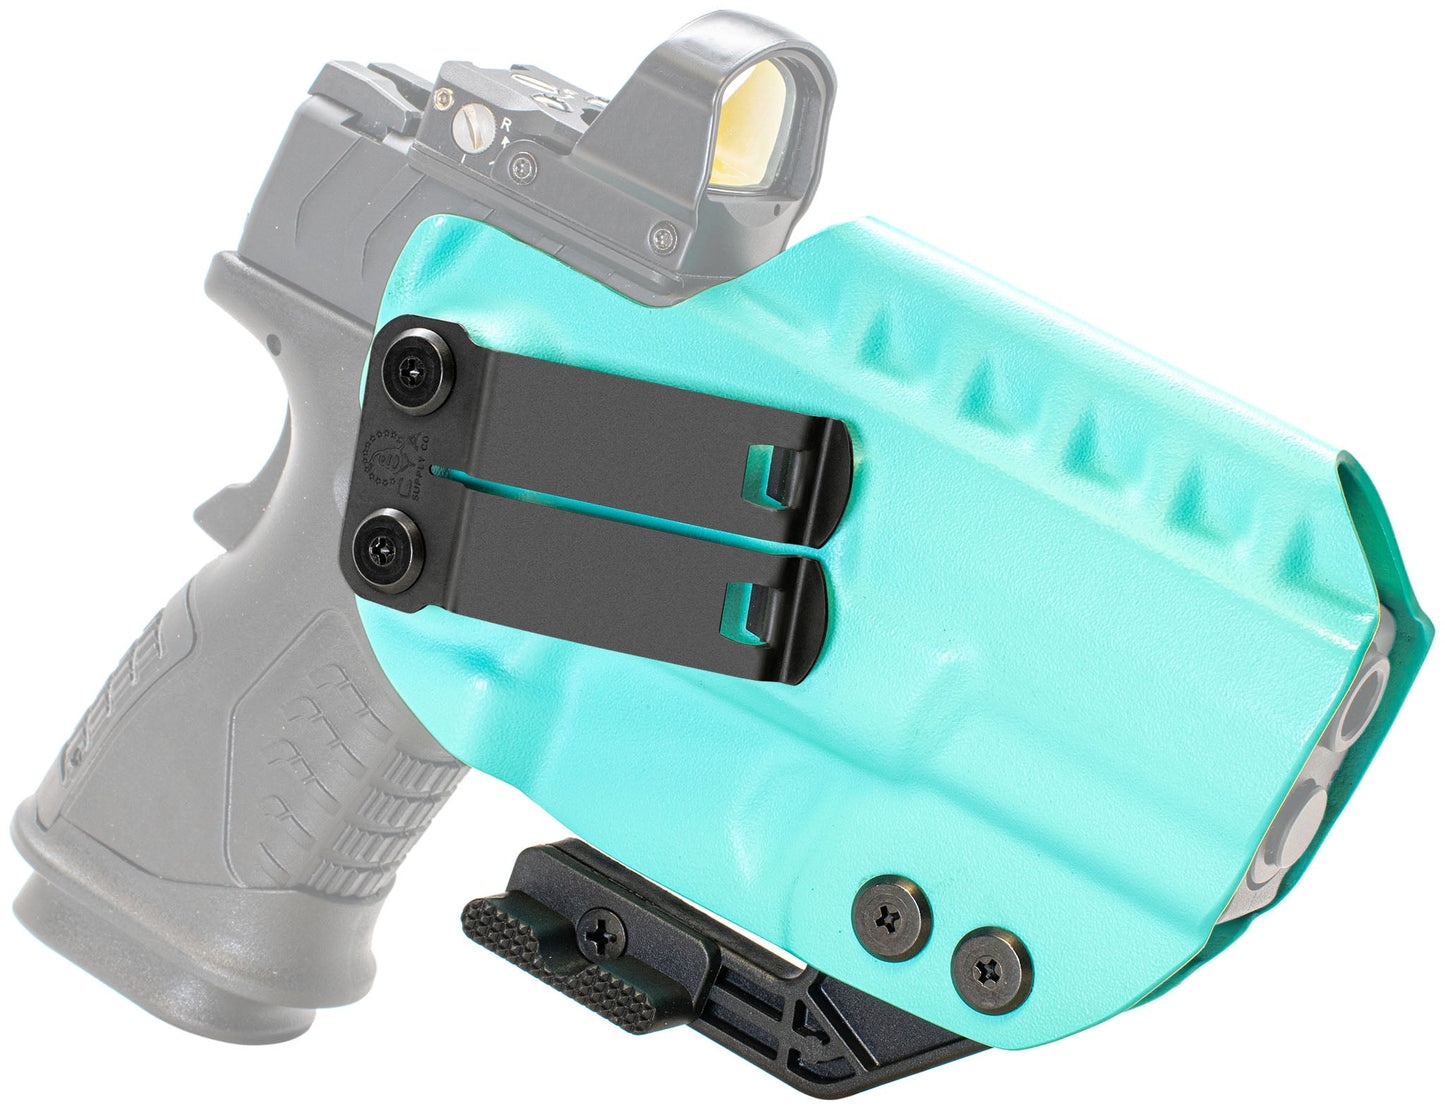 Springfield XD-M ELITE 3.8" COMPACT OSP 9mm Holster CYA Supply Co.